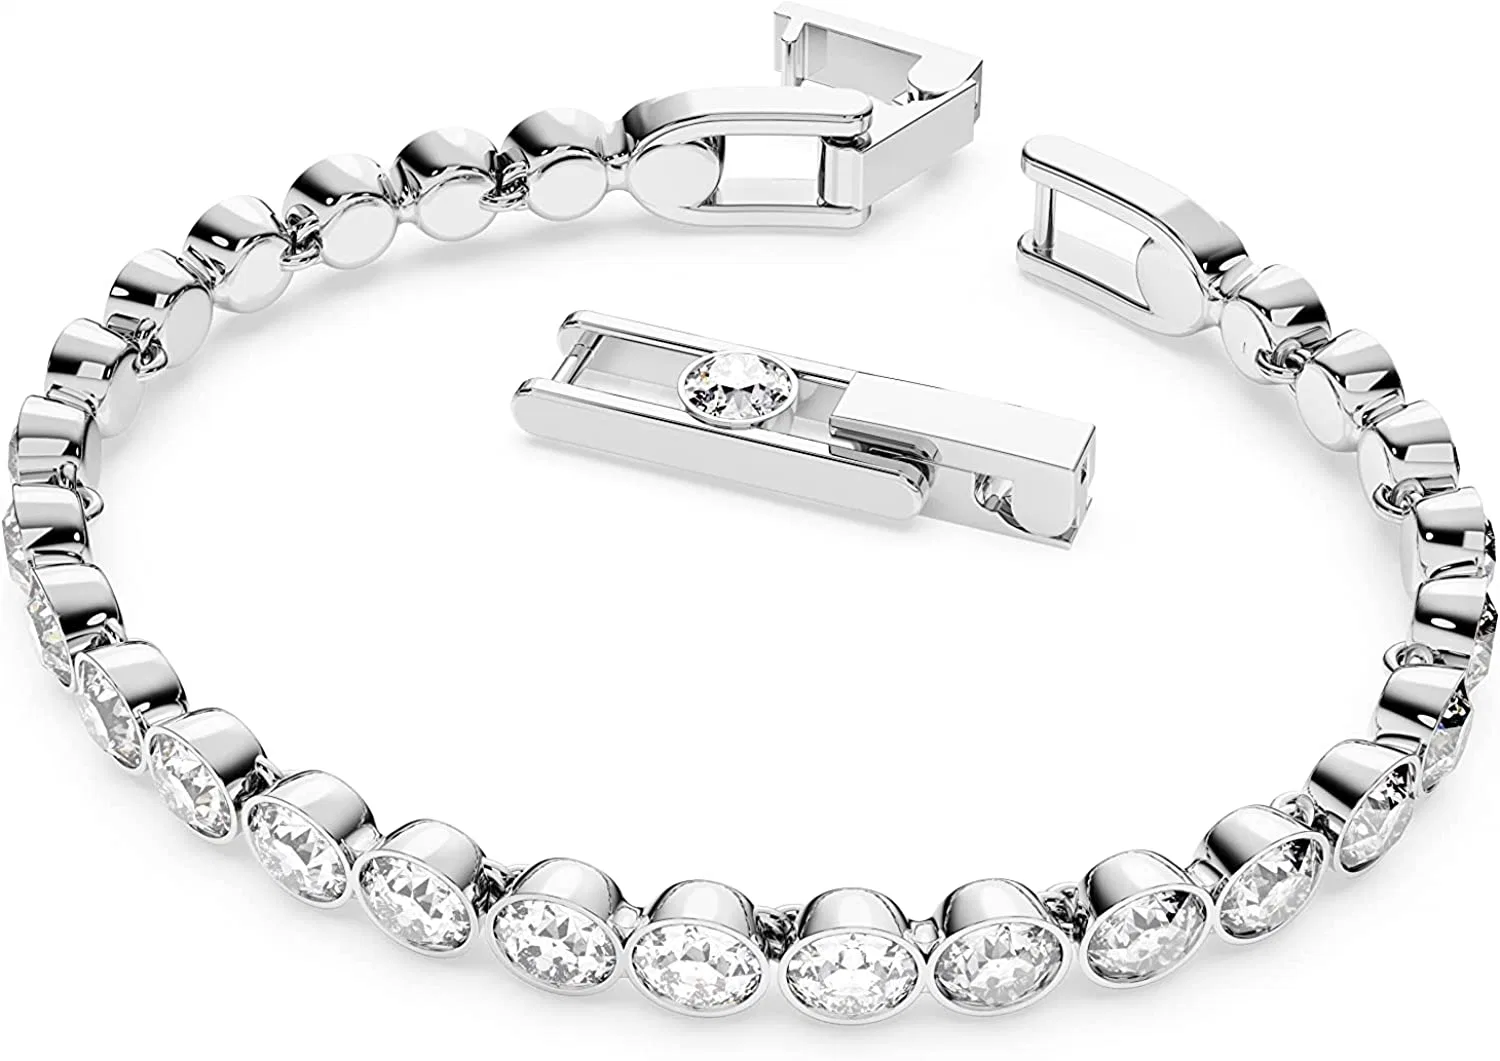 Clear Crystals Costume Jewelry Fashion Accessories Bracelet